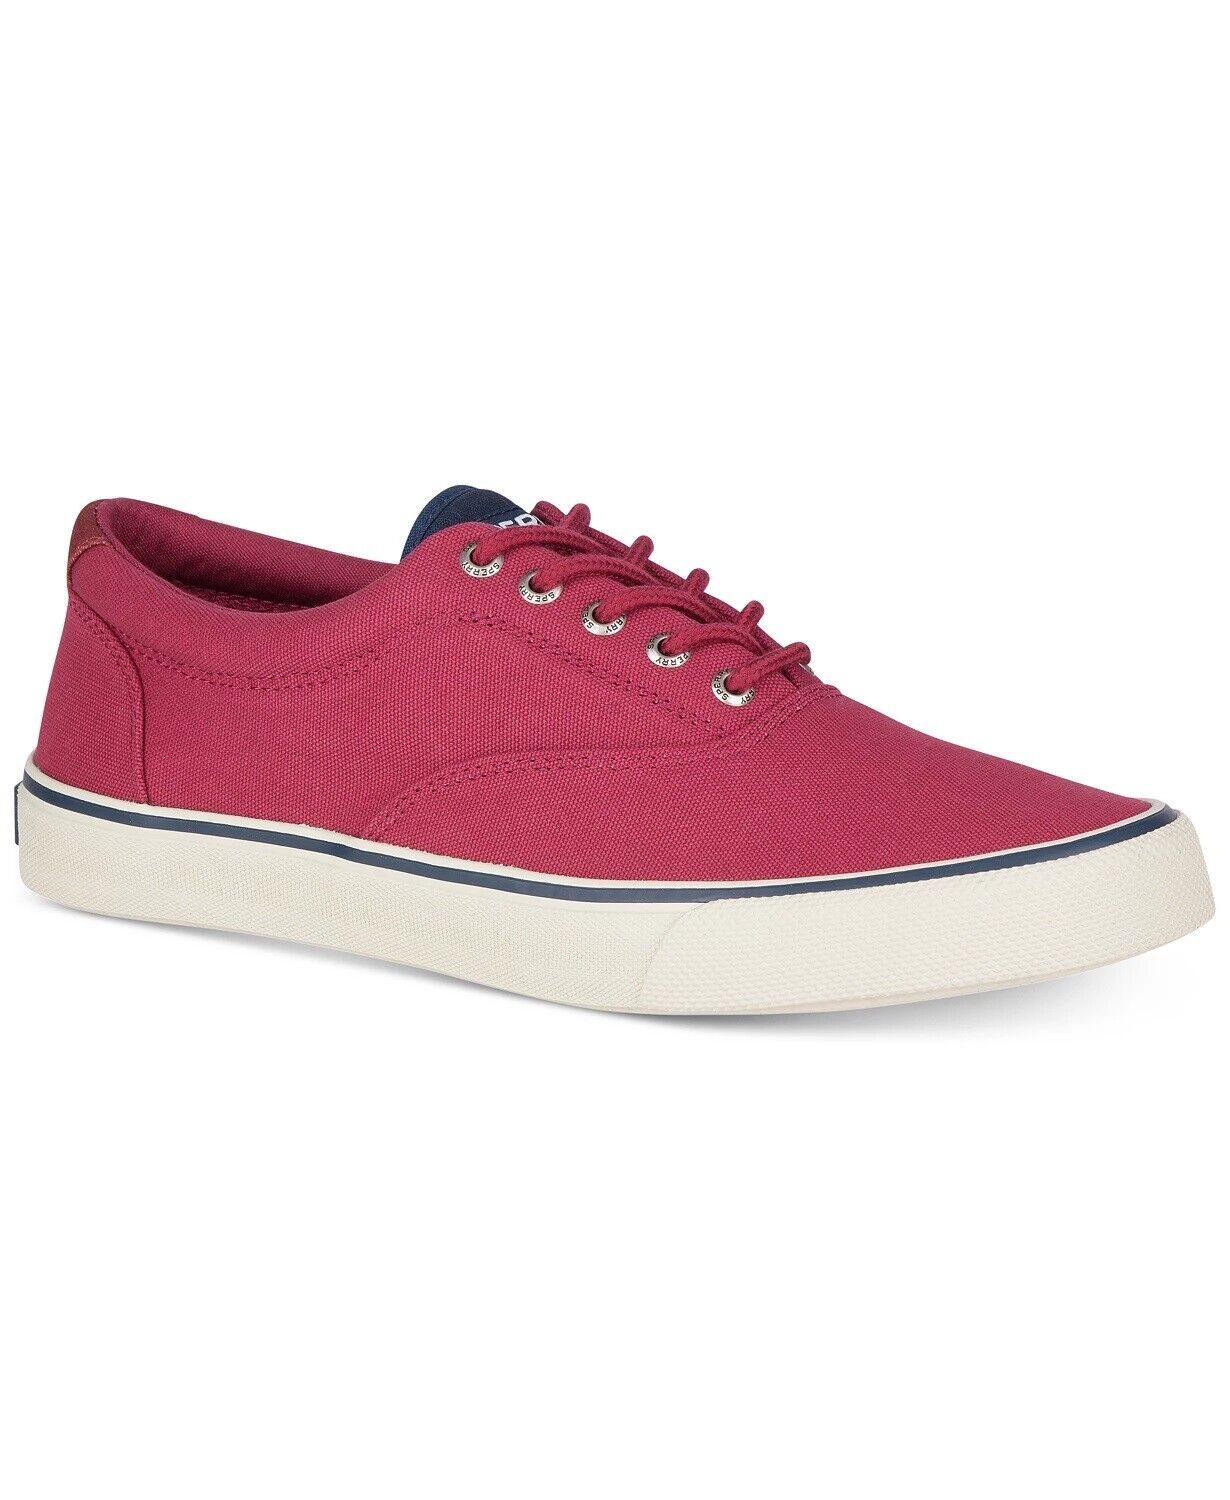 Sperry Top Sider Men Striper II CVO Burgundy Casual Lace Up Sneakers - $22.03